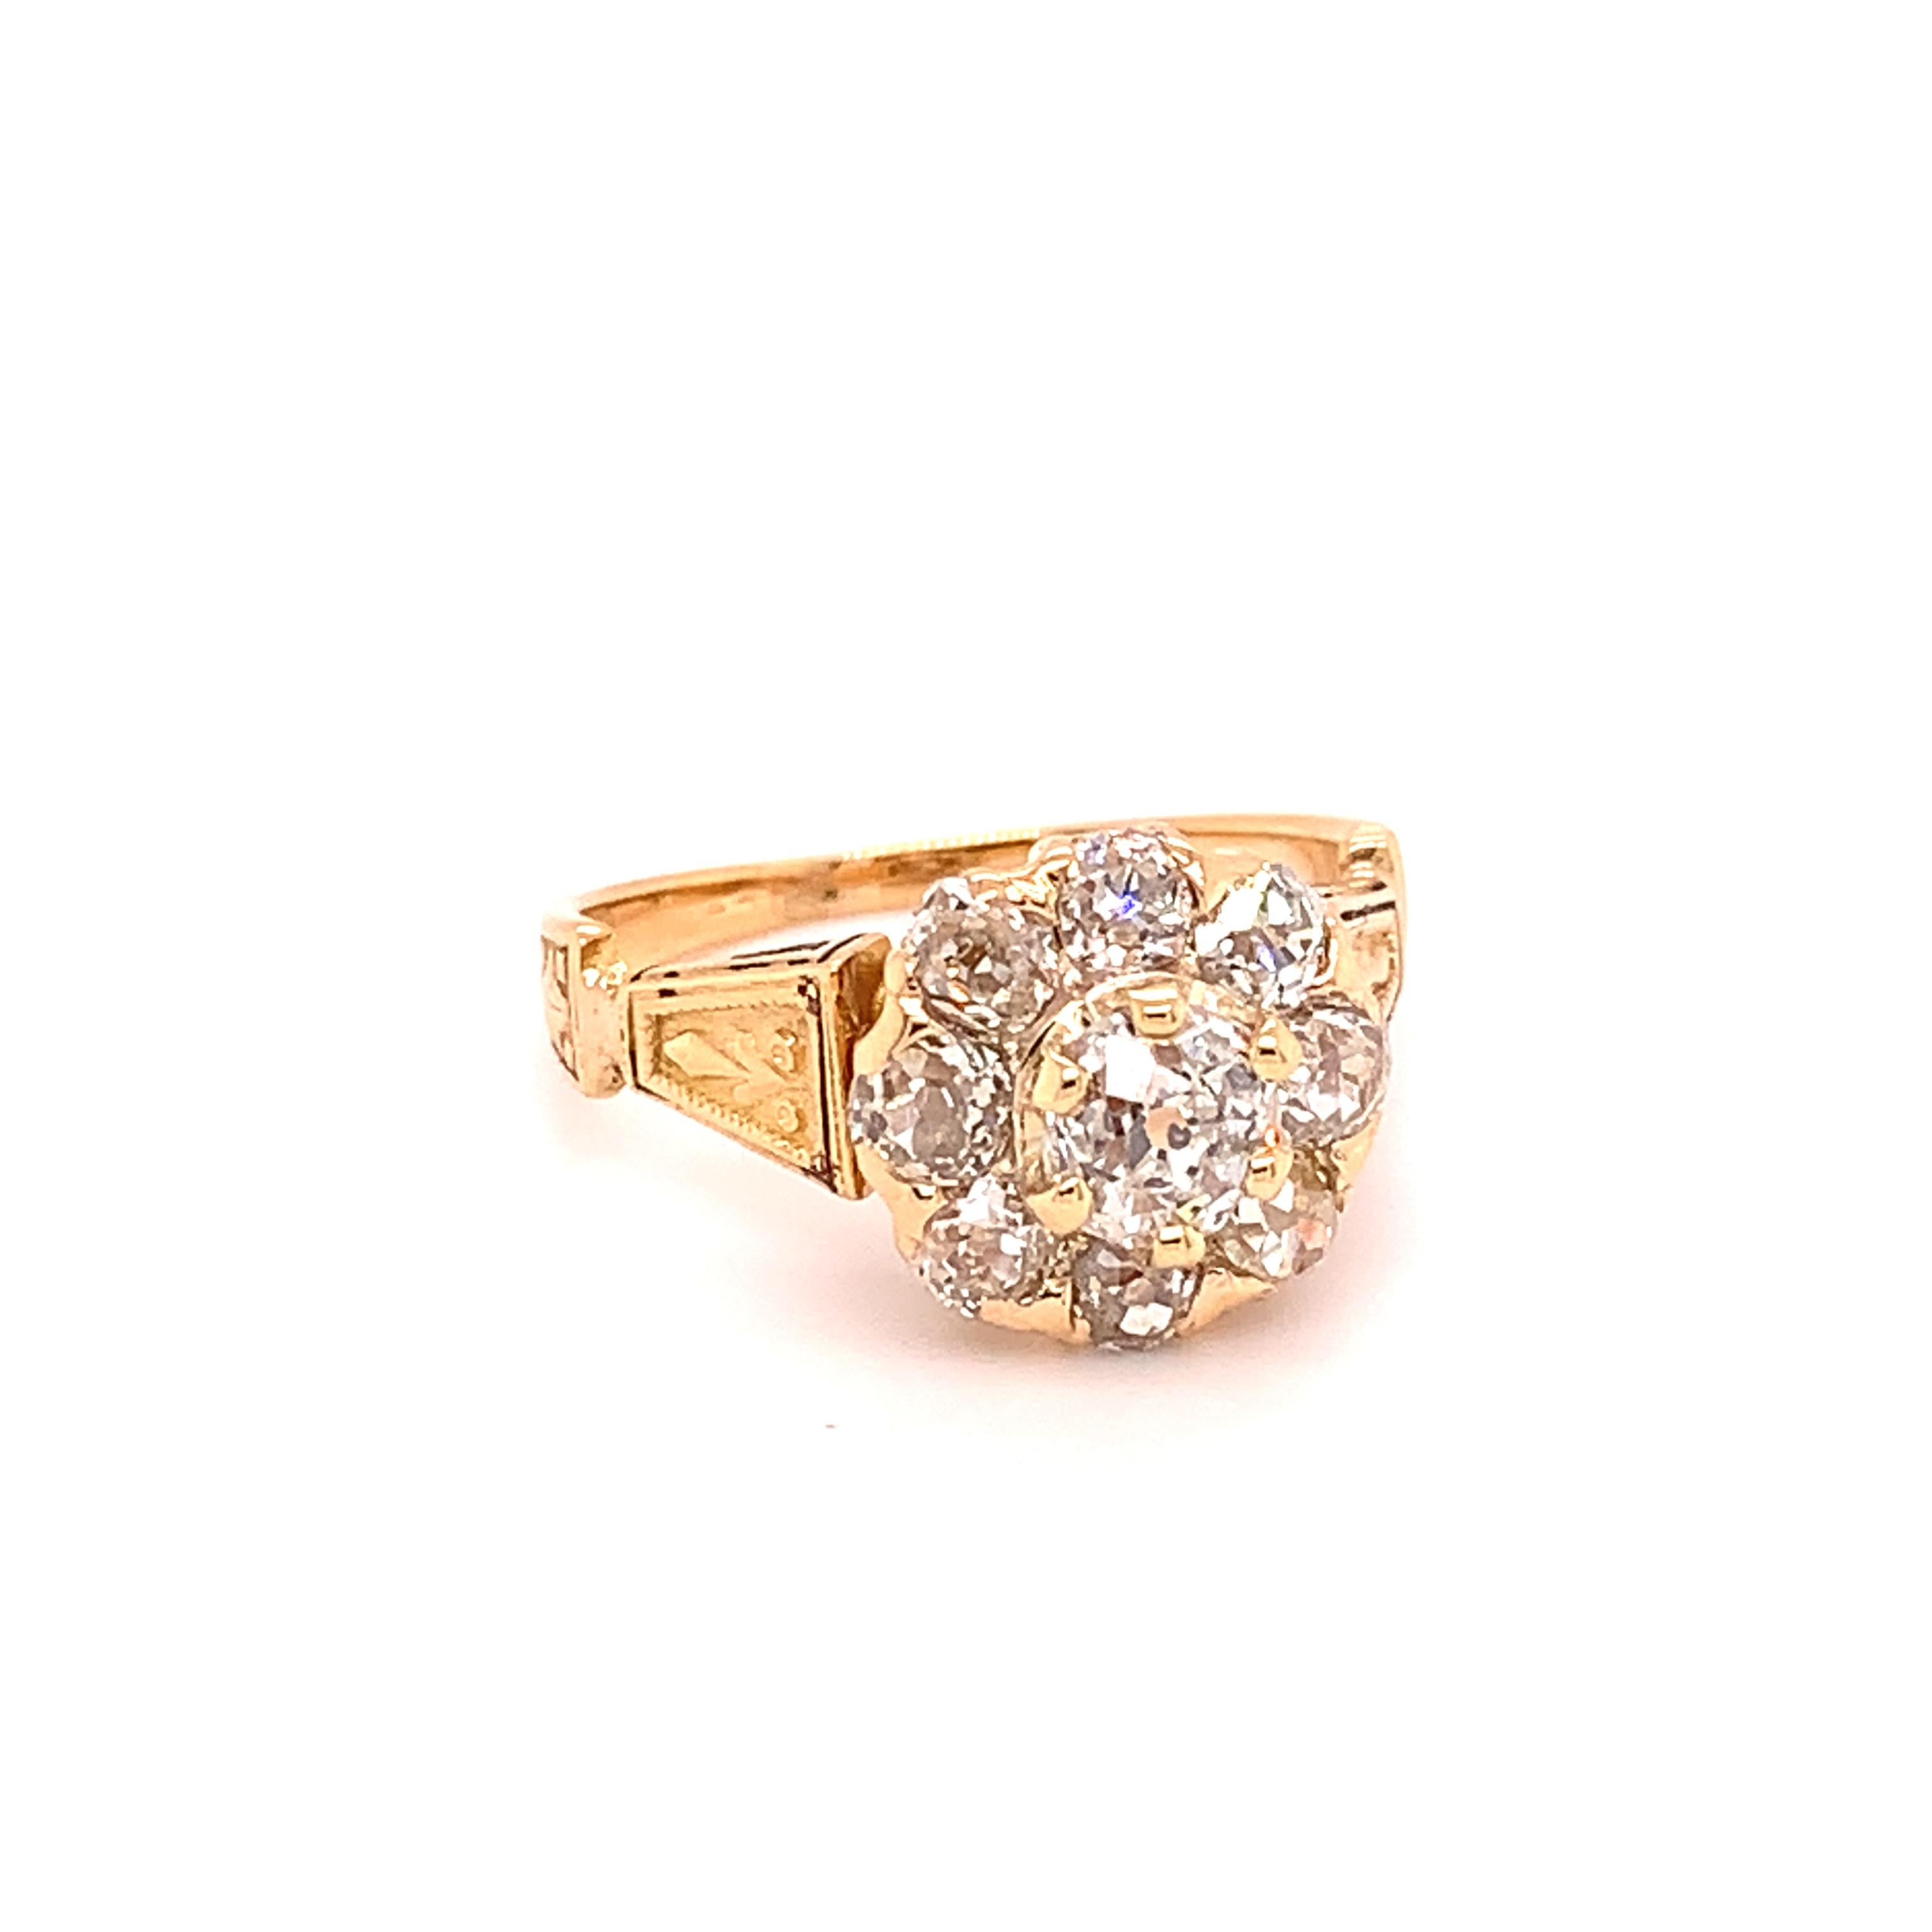 14k Gold Victorian Mine Cut Genuine Natural Diamond Ring 1.61 Carats TW (#J4863)

14k yellow gold Victorian diamond ring with 1.61 carats total weight of antique mine cut diamonds. The center diamond weighs .61cts and measures about 5mm. There are